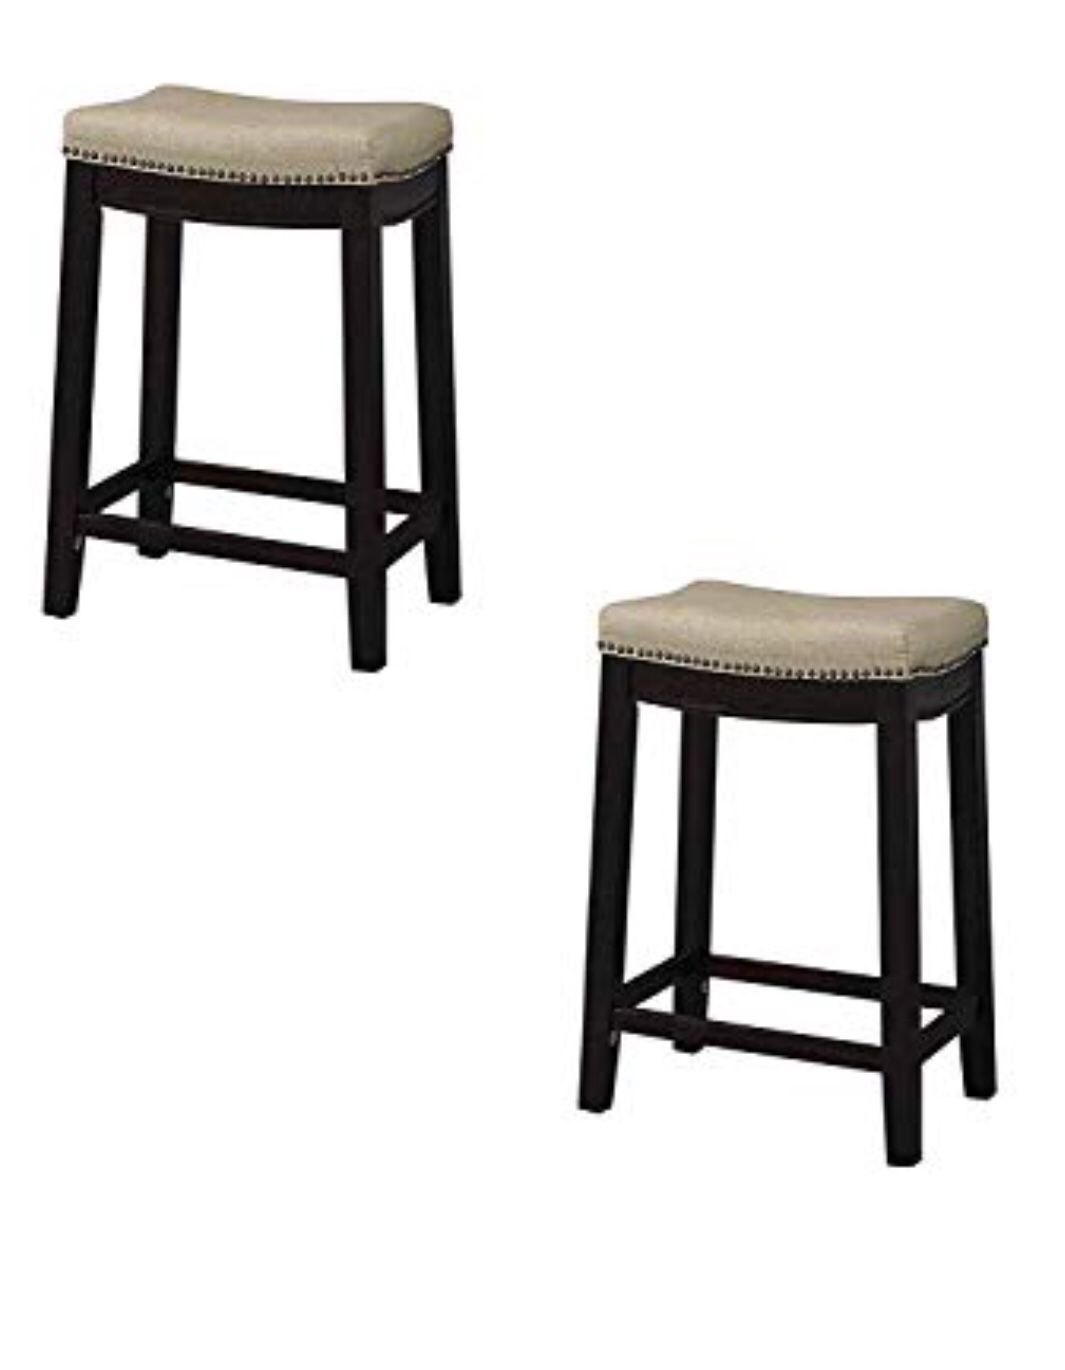 Set of 2 - 24" height counter stool barstools - NEW